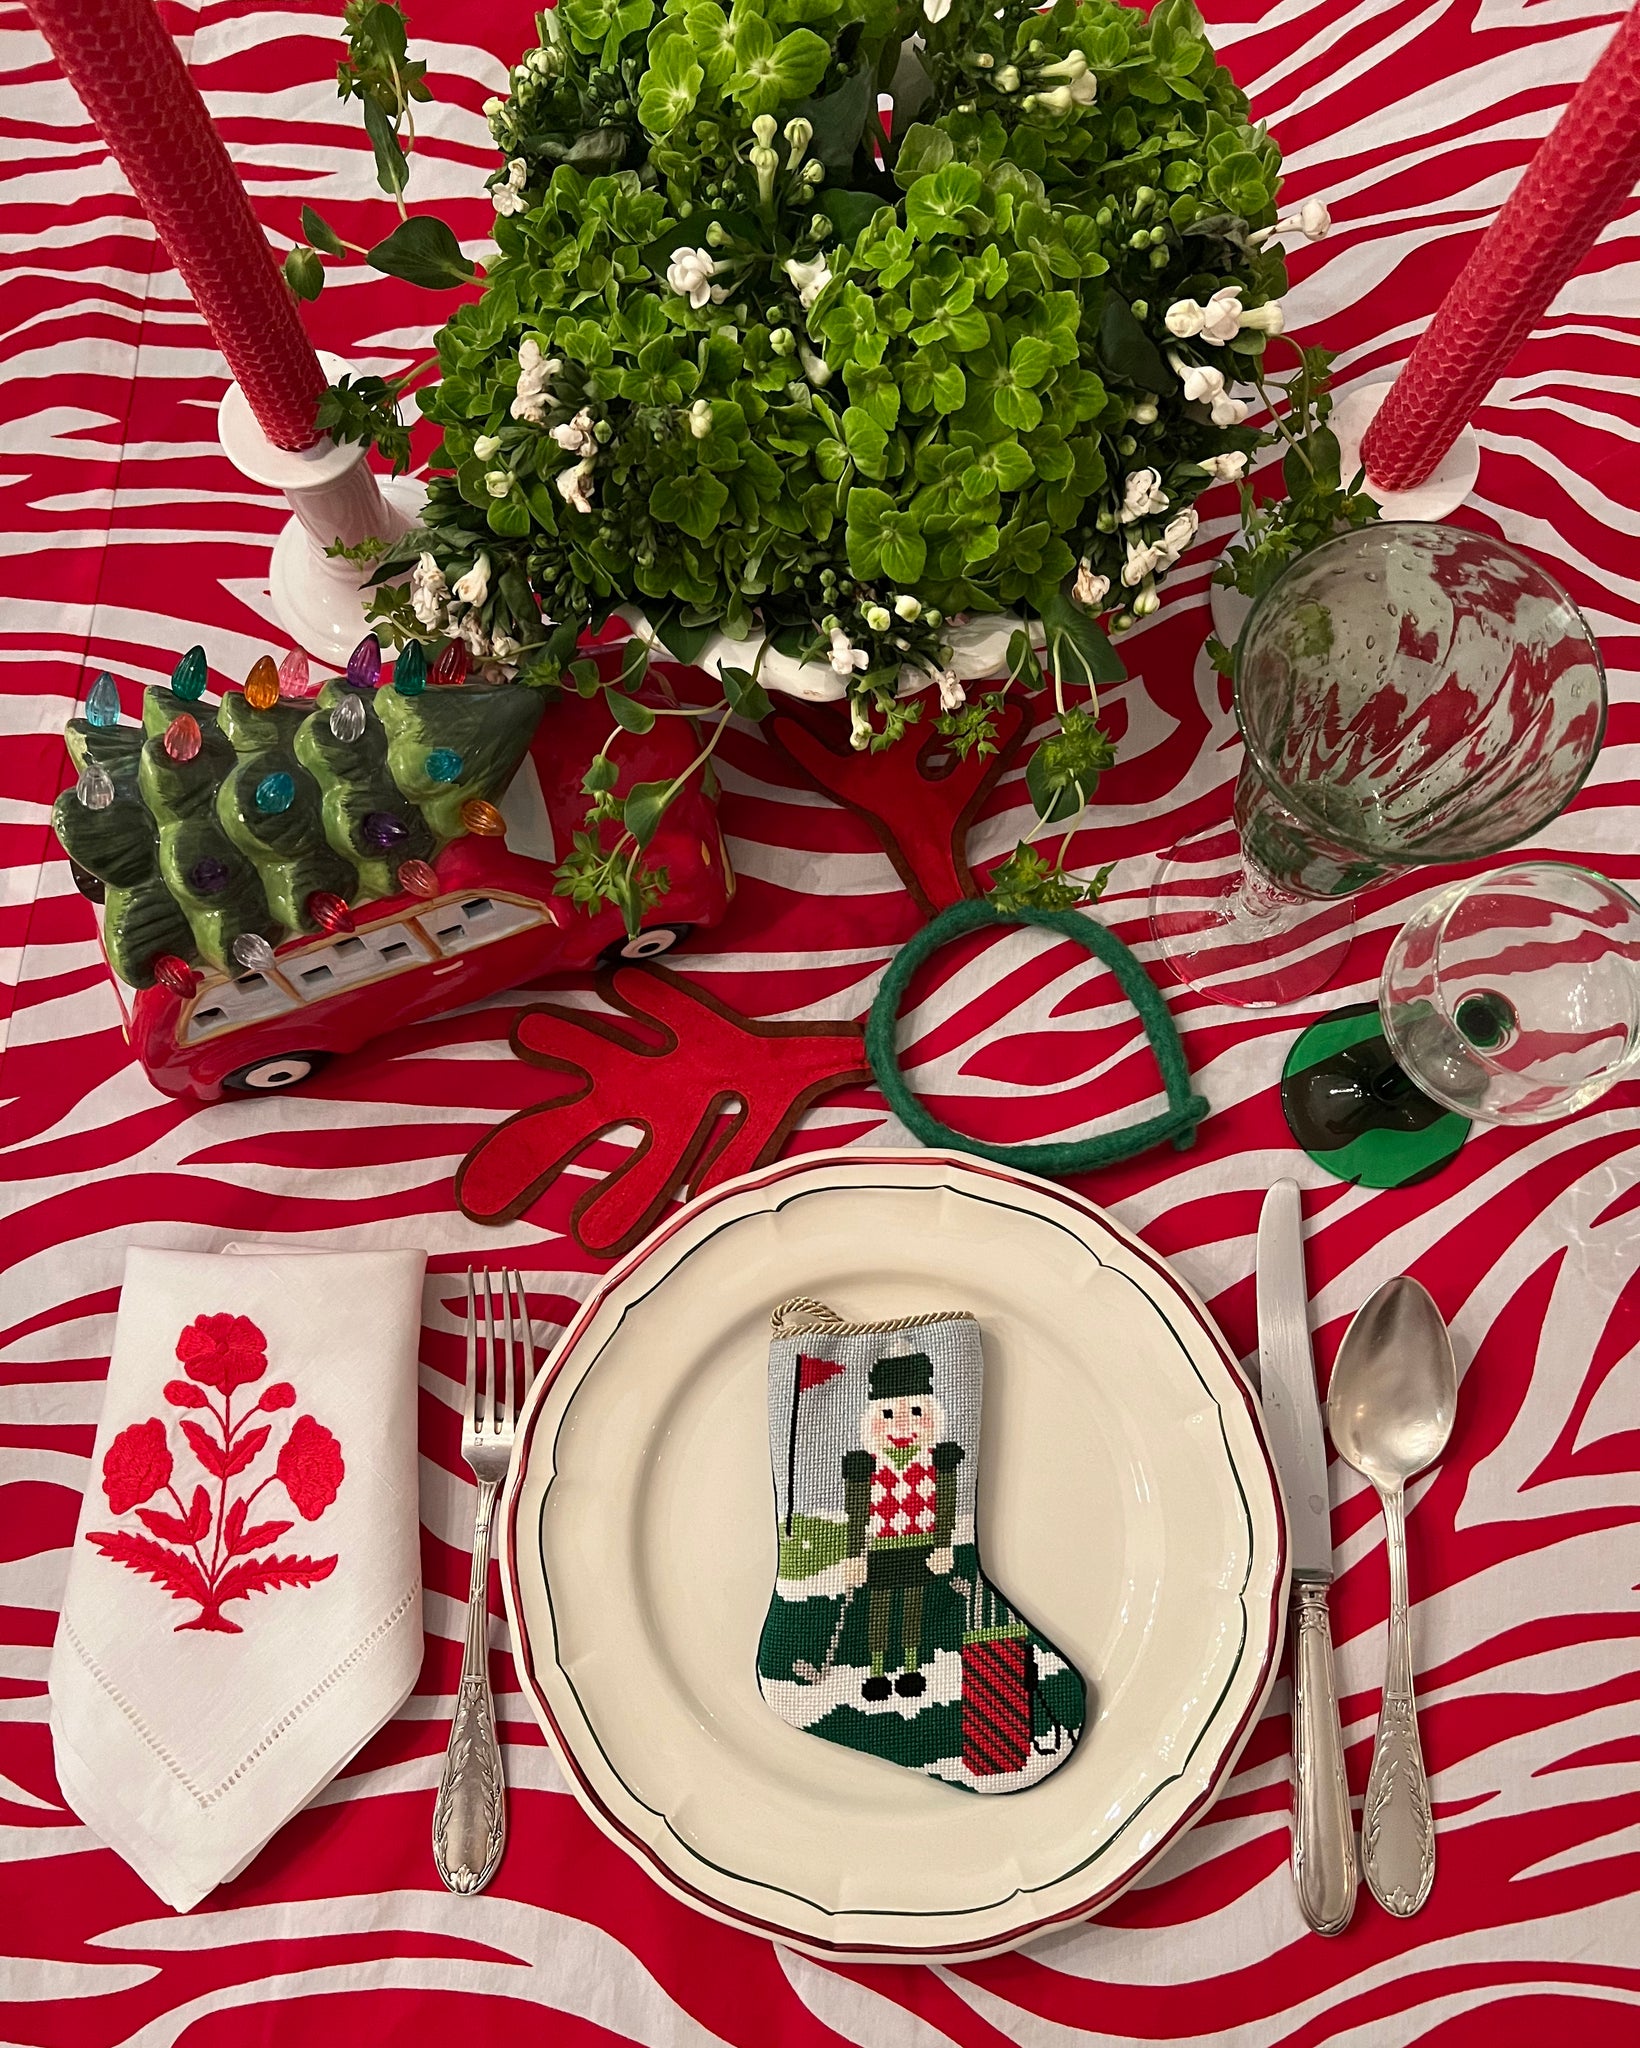 Red and White Zebra Tablecloth